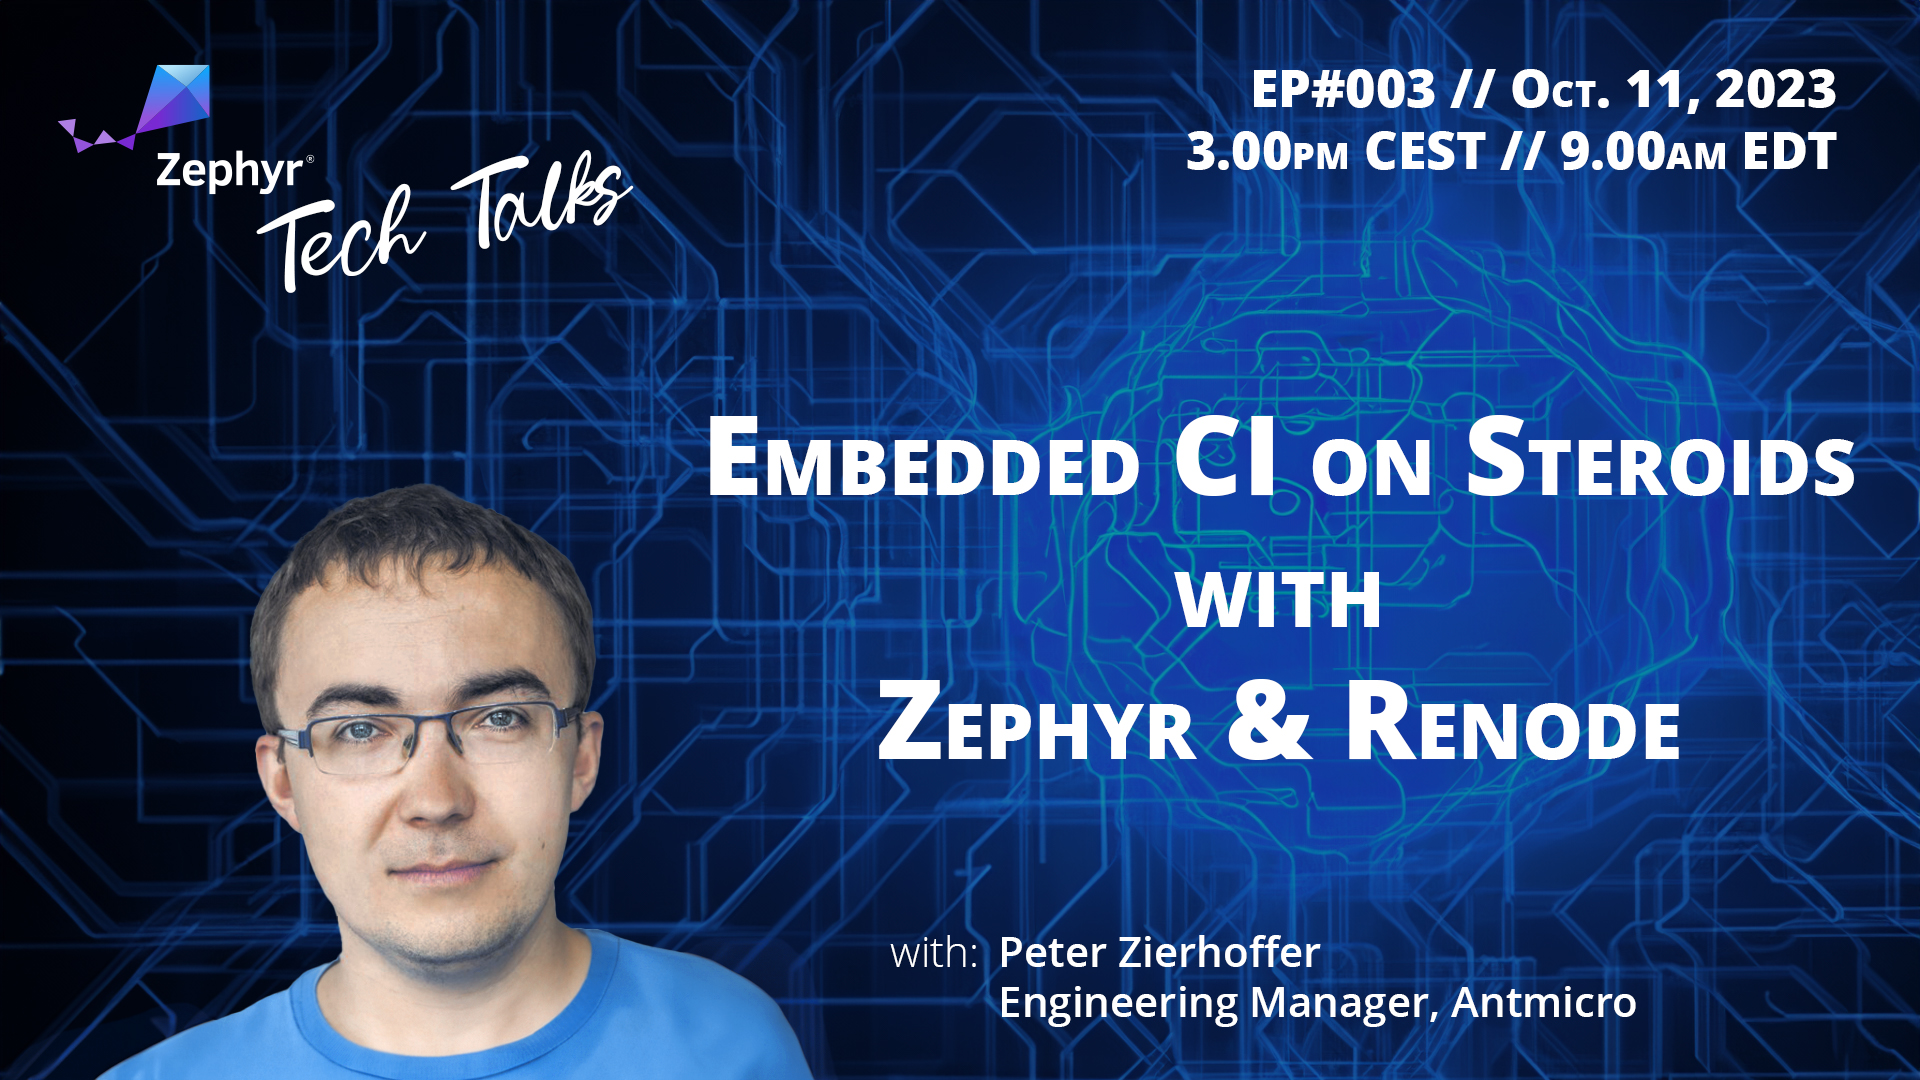 Embedded CI on Steroids with Zephyr & Renode // Zephyr Tech Talk #003